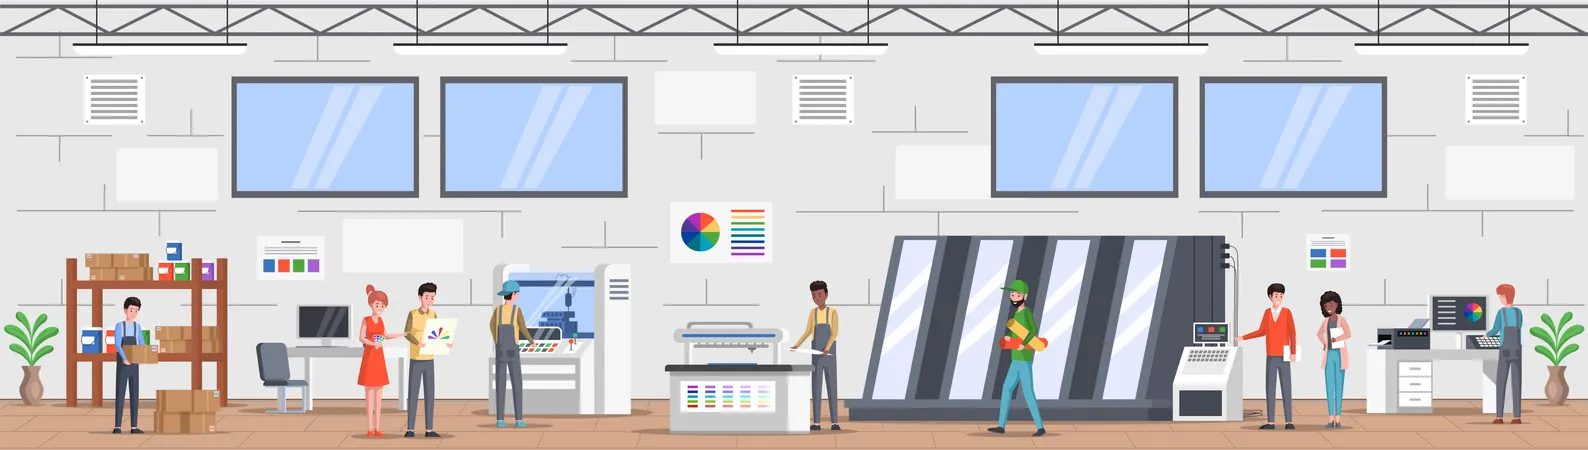 People in printing house Illustration